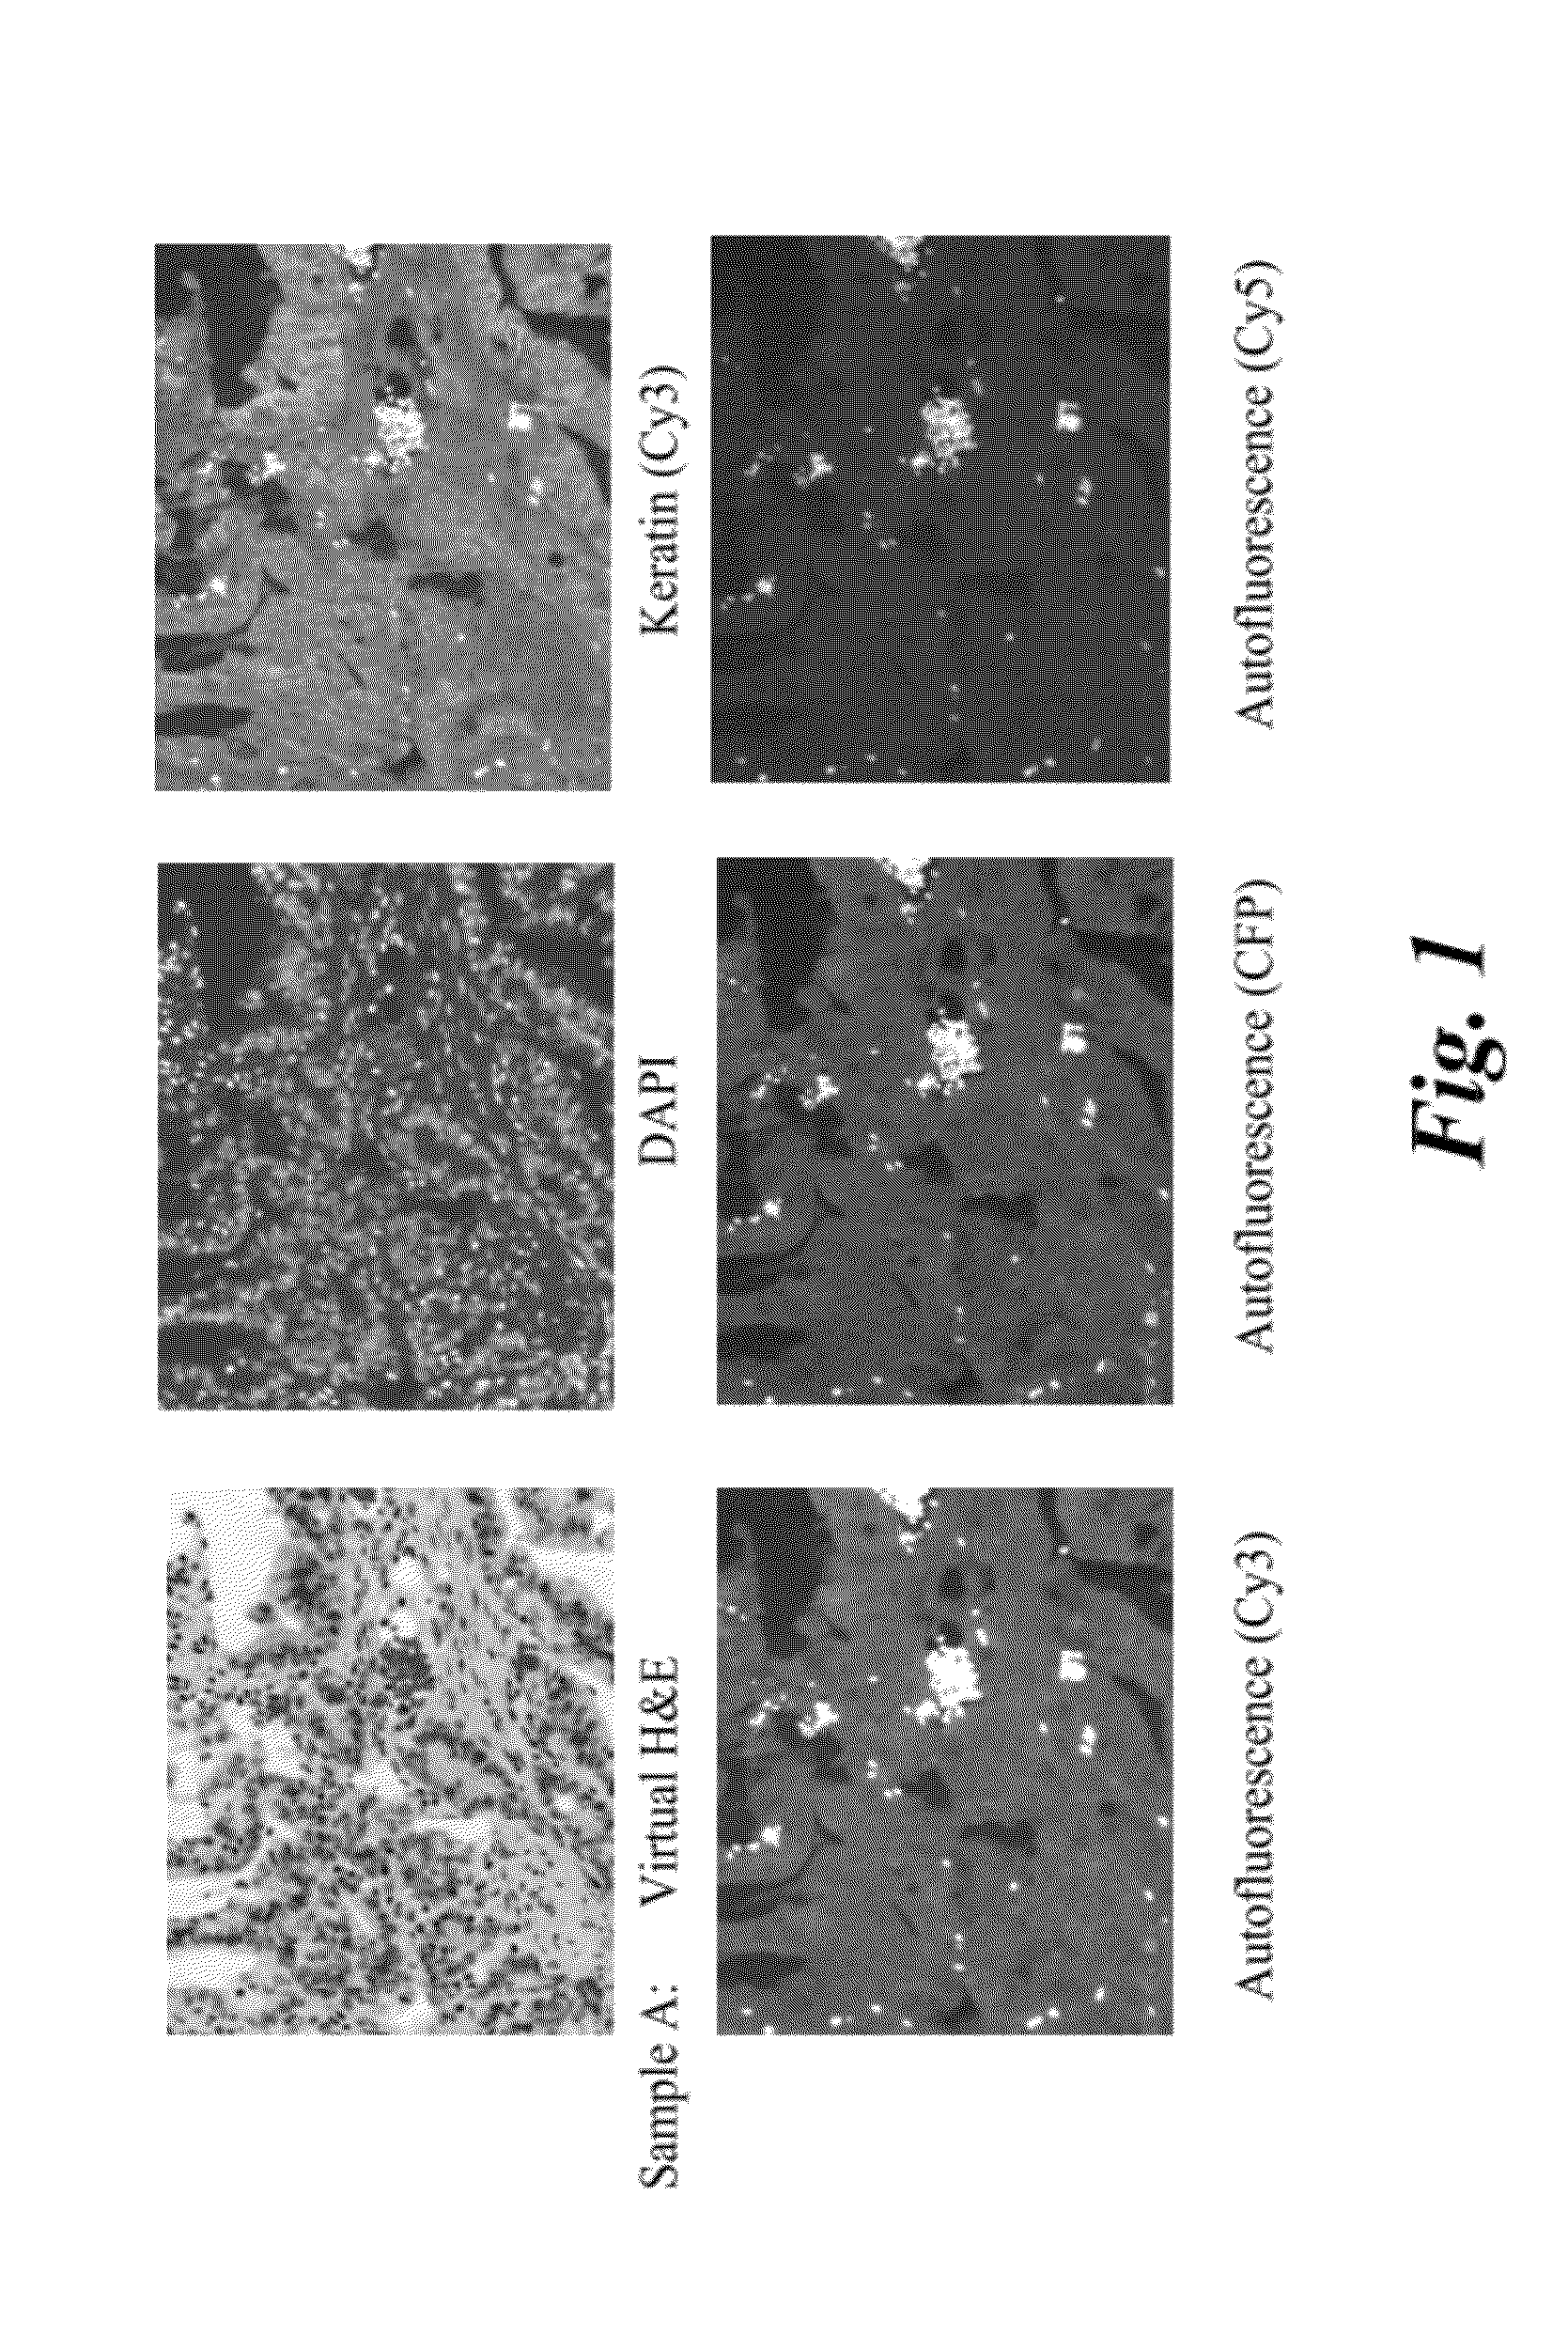 System and methods for mapping fluorescent images into a bright field color space